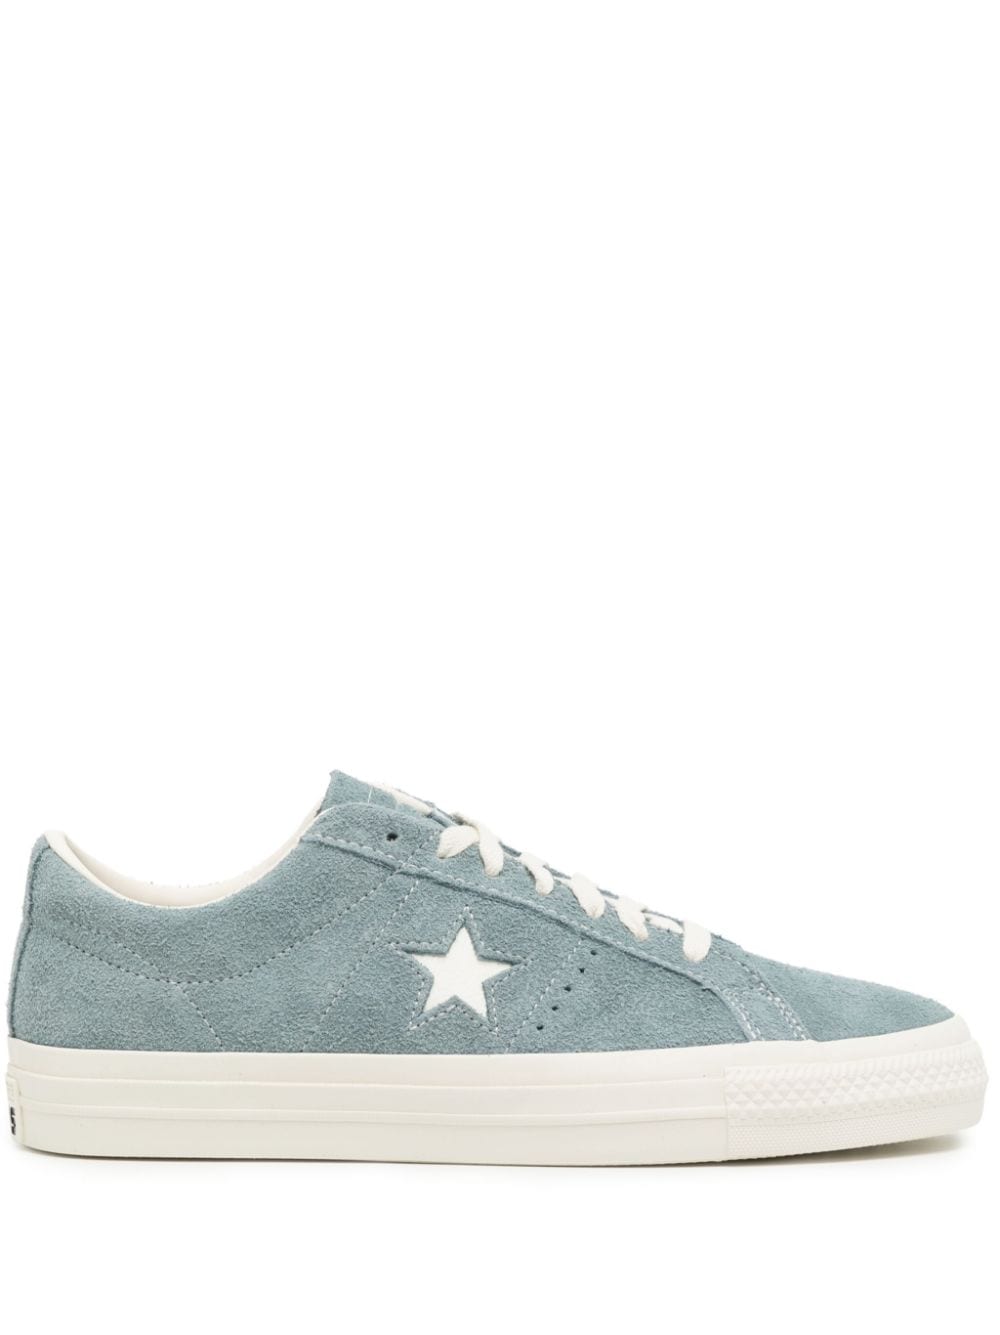 CONVERSE ONE STAR PRO LOW OX SUEDE trainers